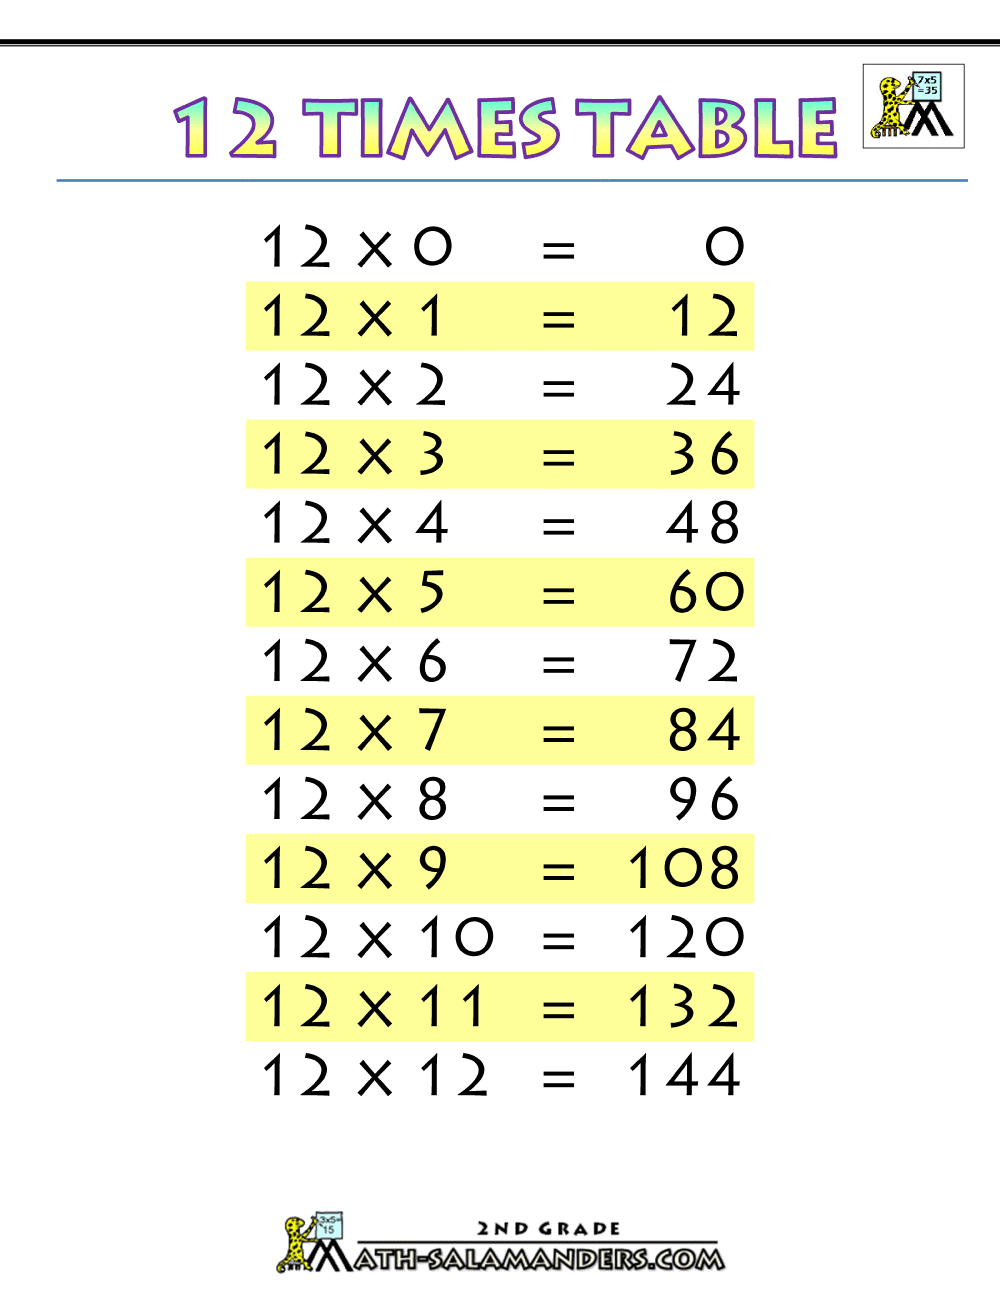 12 multiplication table for school students